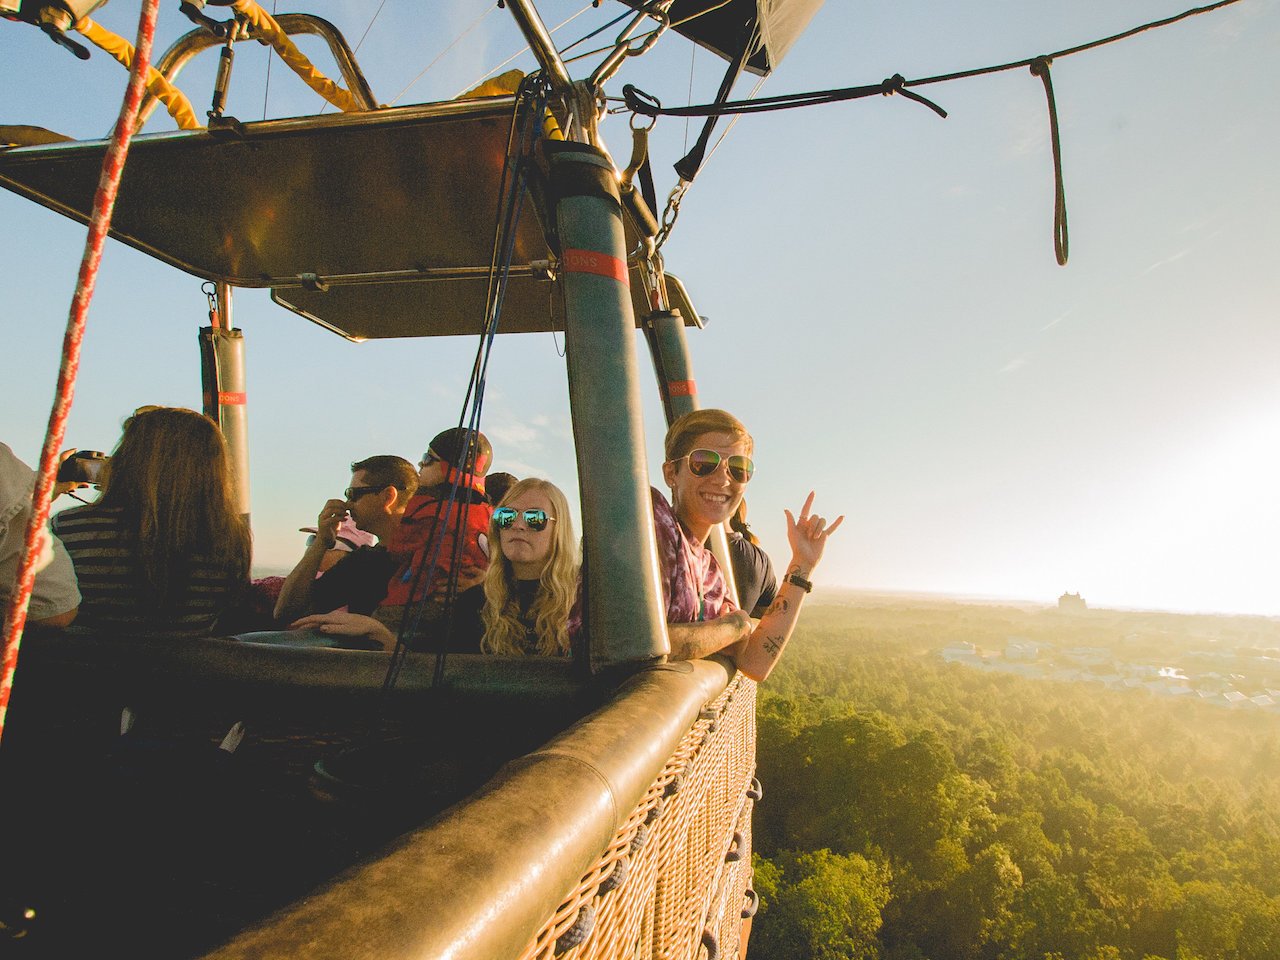 people waving from inside a hot air balloon